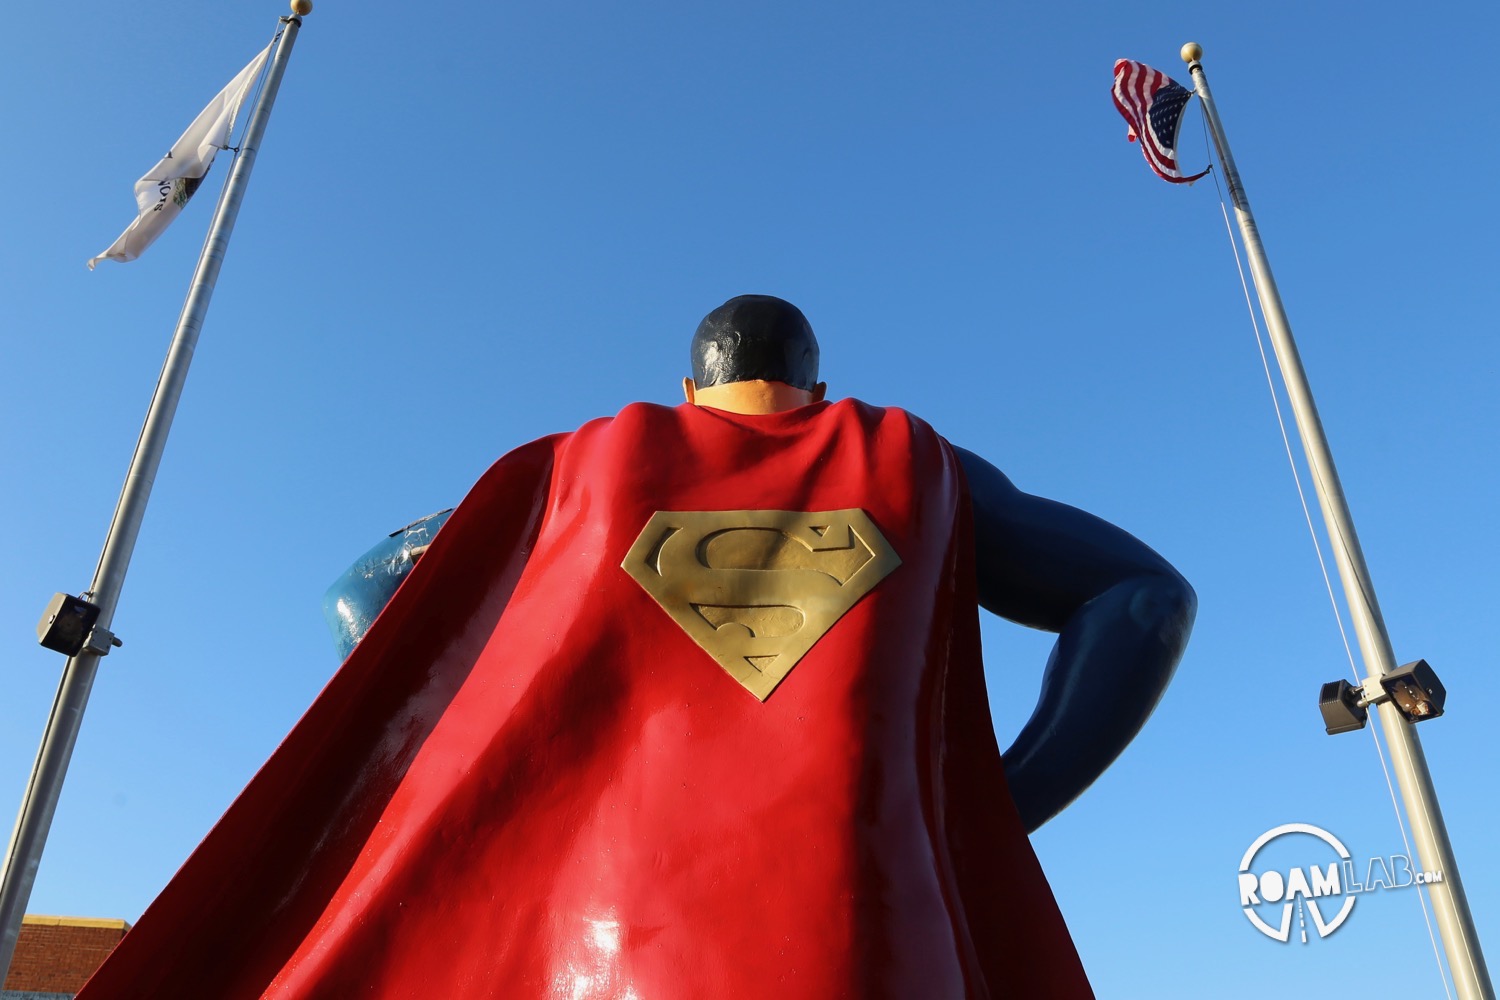 On January 21, 1972, DC comics declared the fictional town of Metropolis to be the "Hometown of Superman." On June 9, 1972, the state of Illinois declared the very real town of Metropolis, Illinois to be the "Hometown of Superman." What followed was the inevitable scheduling of Superman themed events, attractions, and a very large statue in the town square.